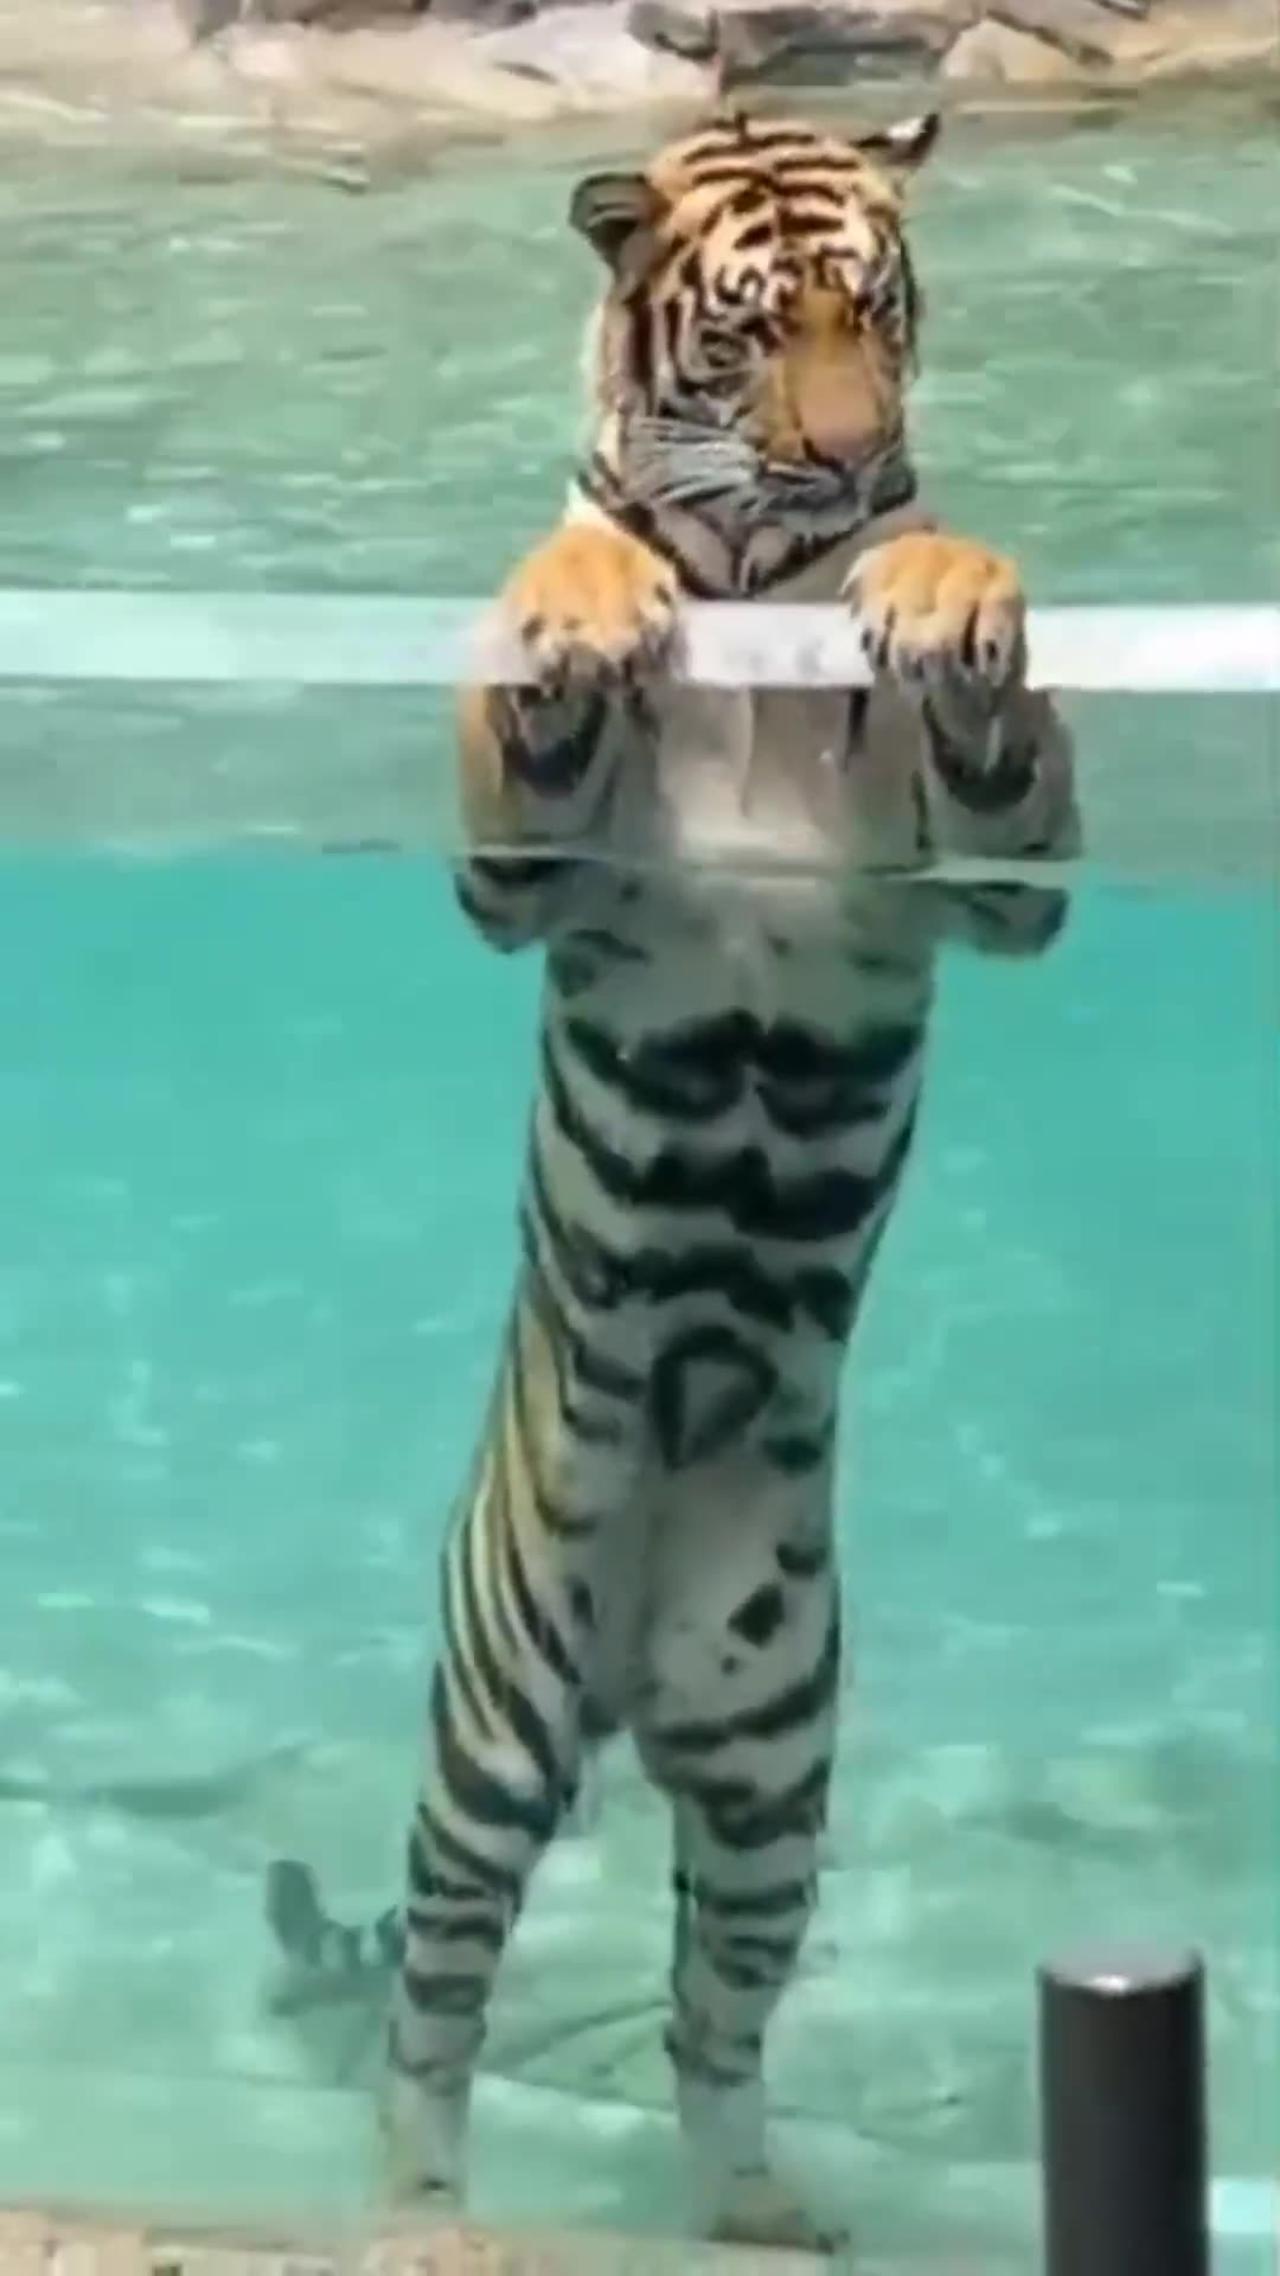 Big stripes in Funny Animals Shorts 202 viral cat in pool video makes cats, dogs, and pets giggle.